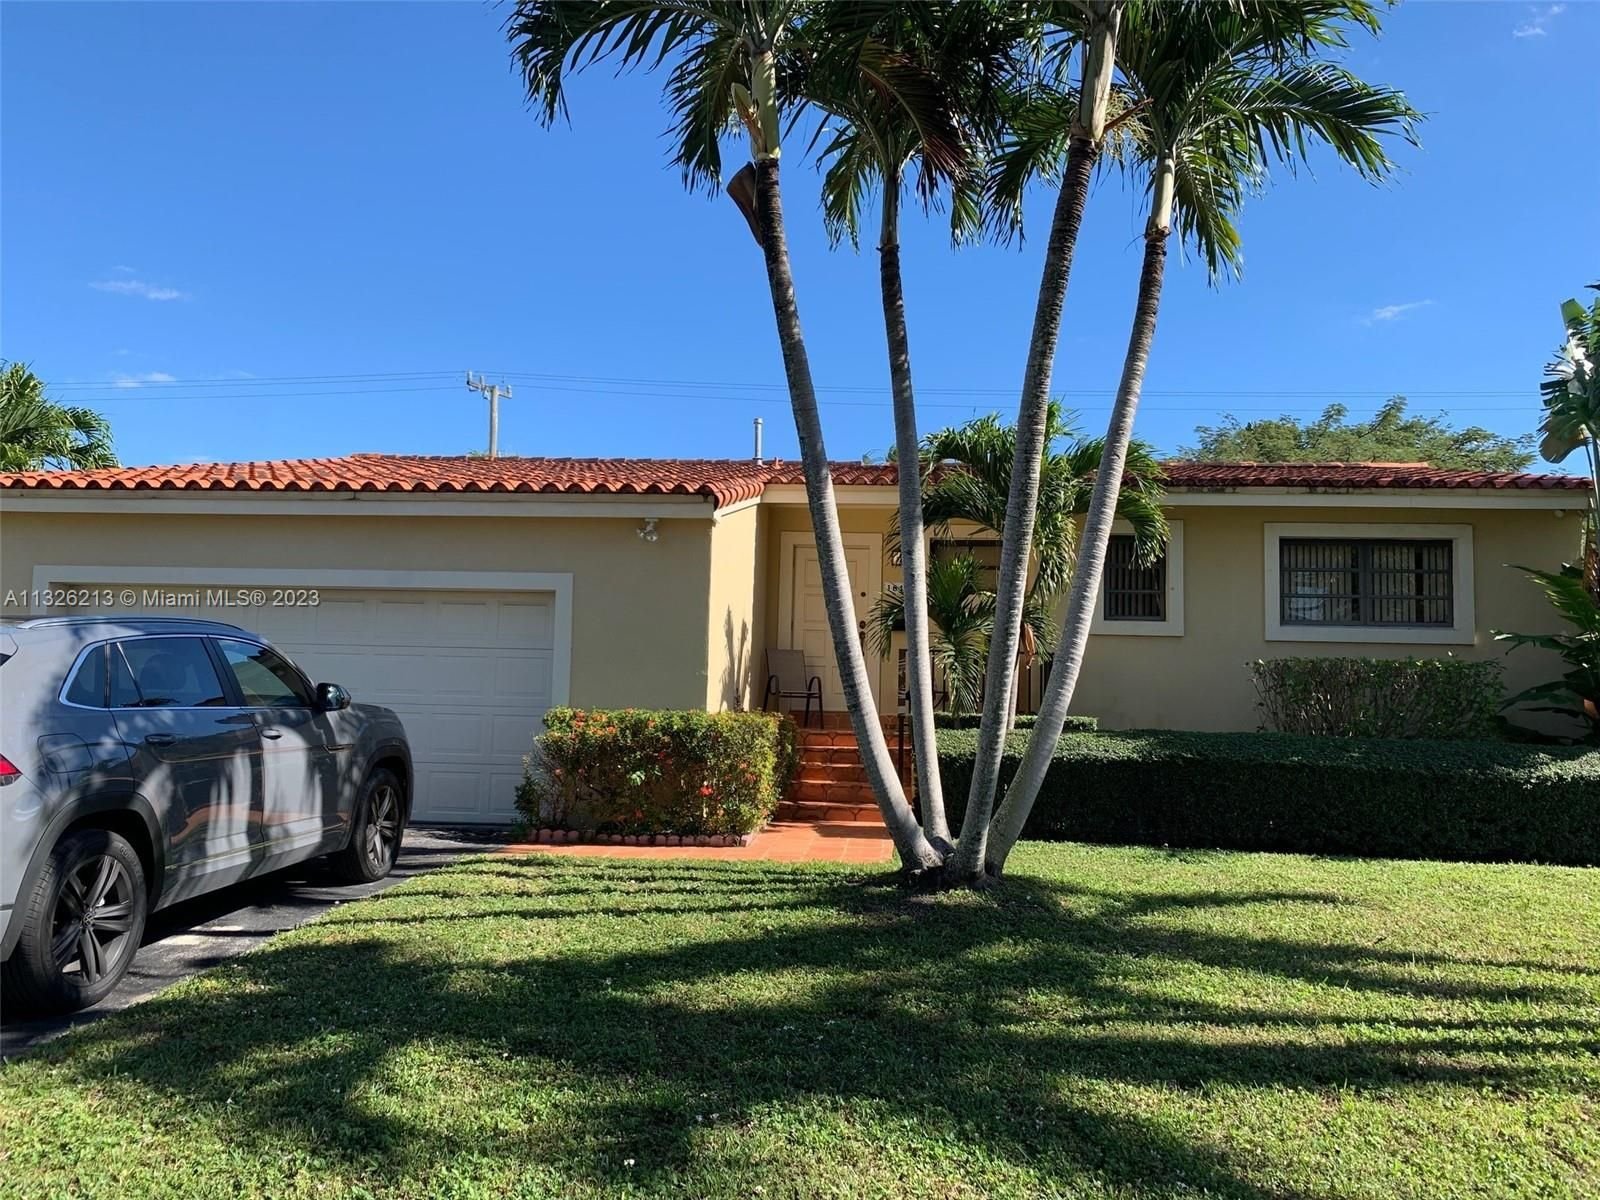 Real estate property located at 1645 83rd Ave, Miami-Dade County, Miami, FL